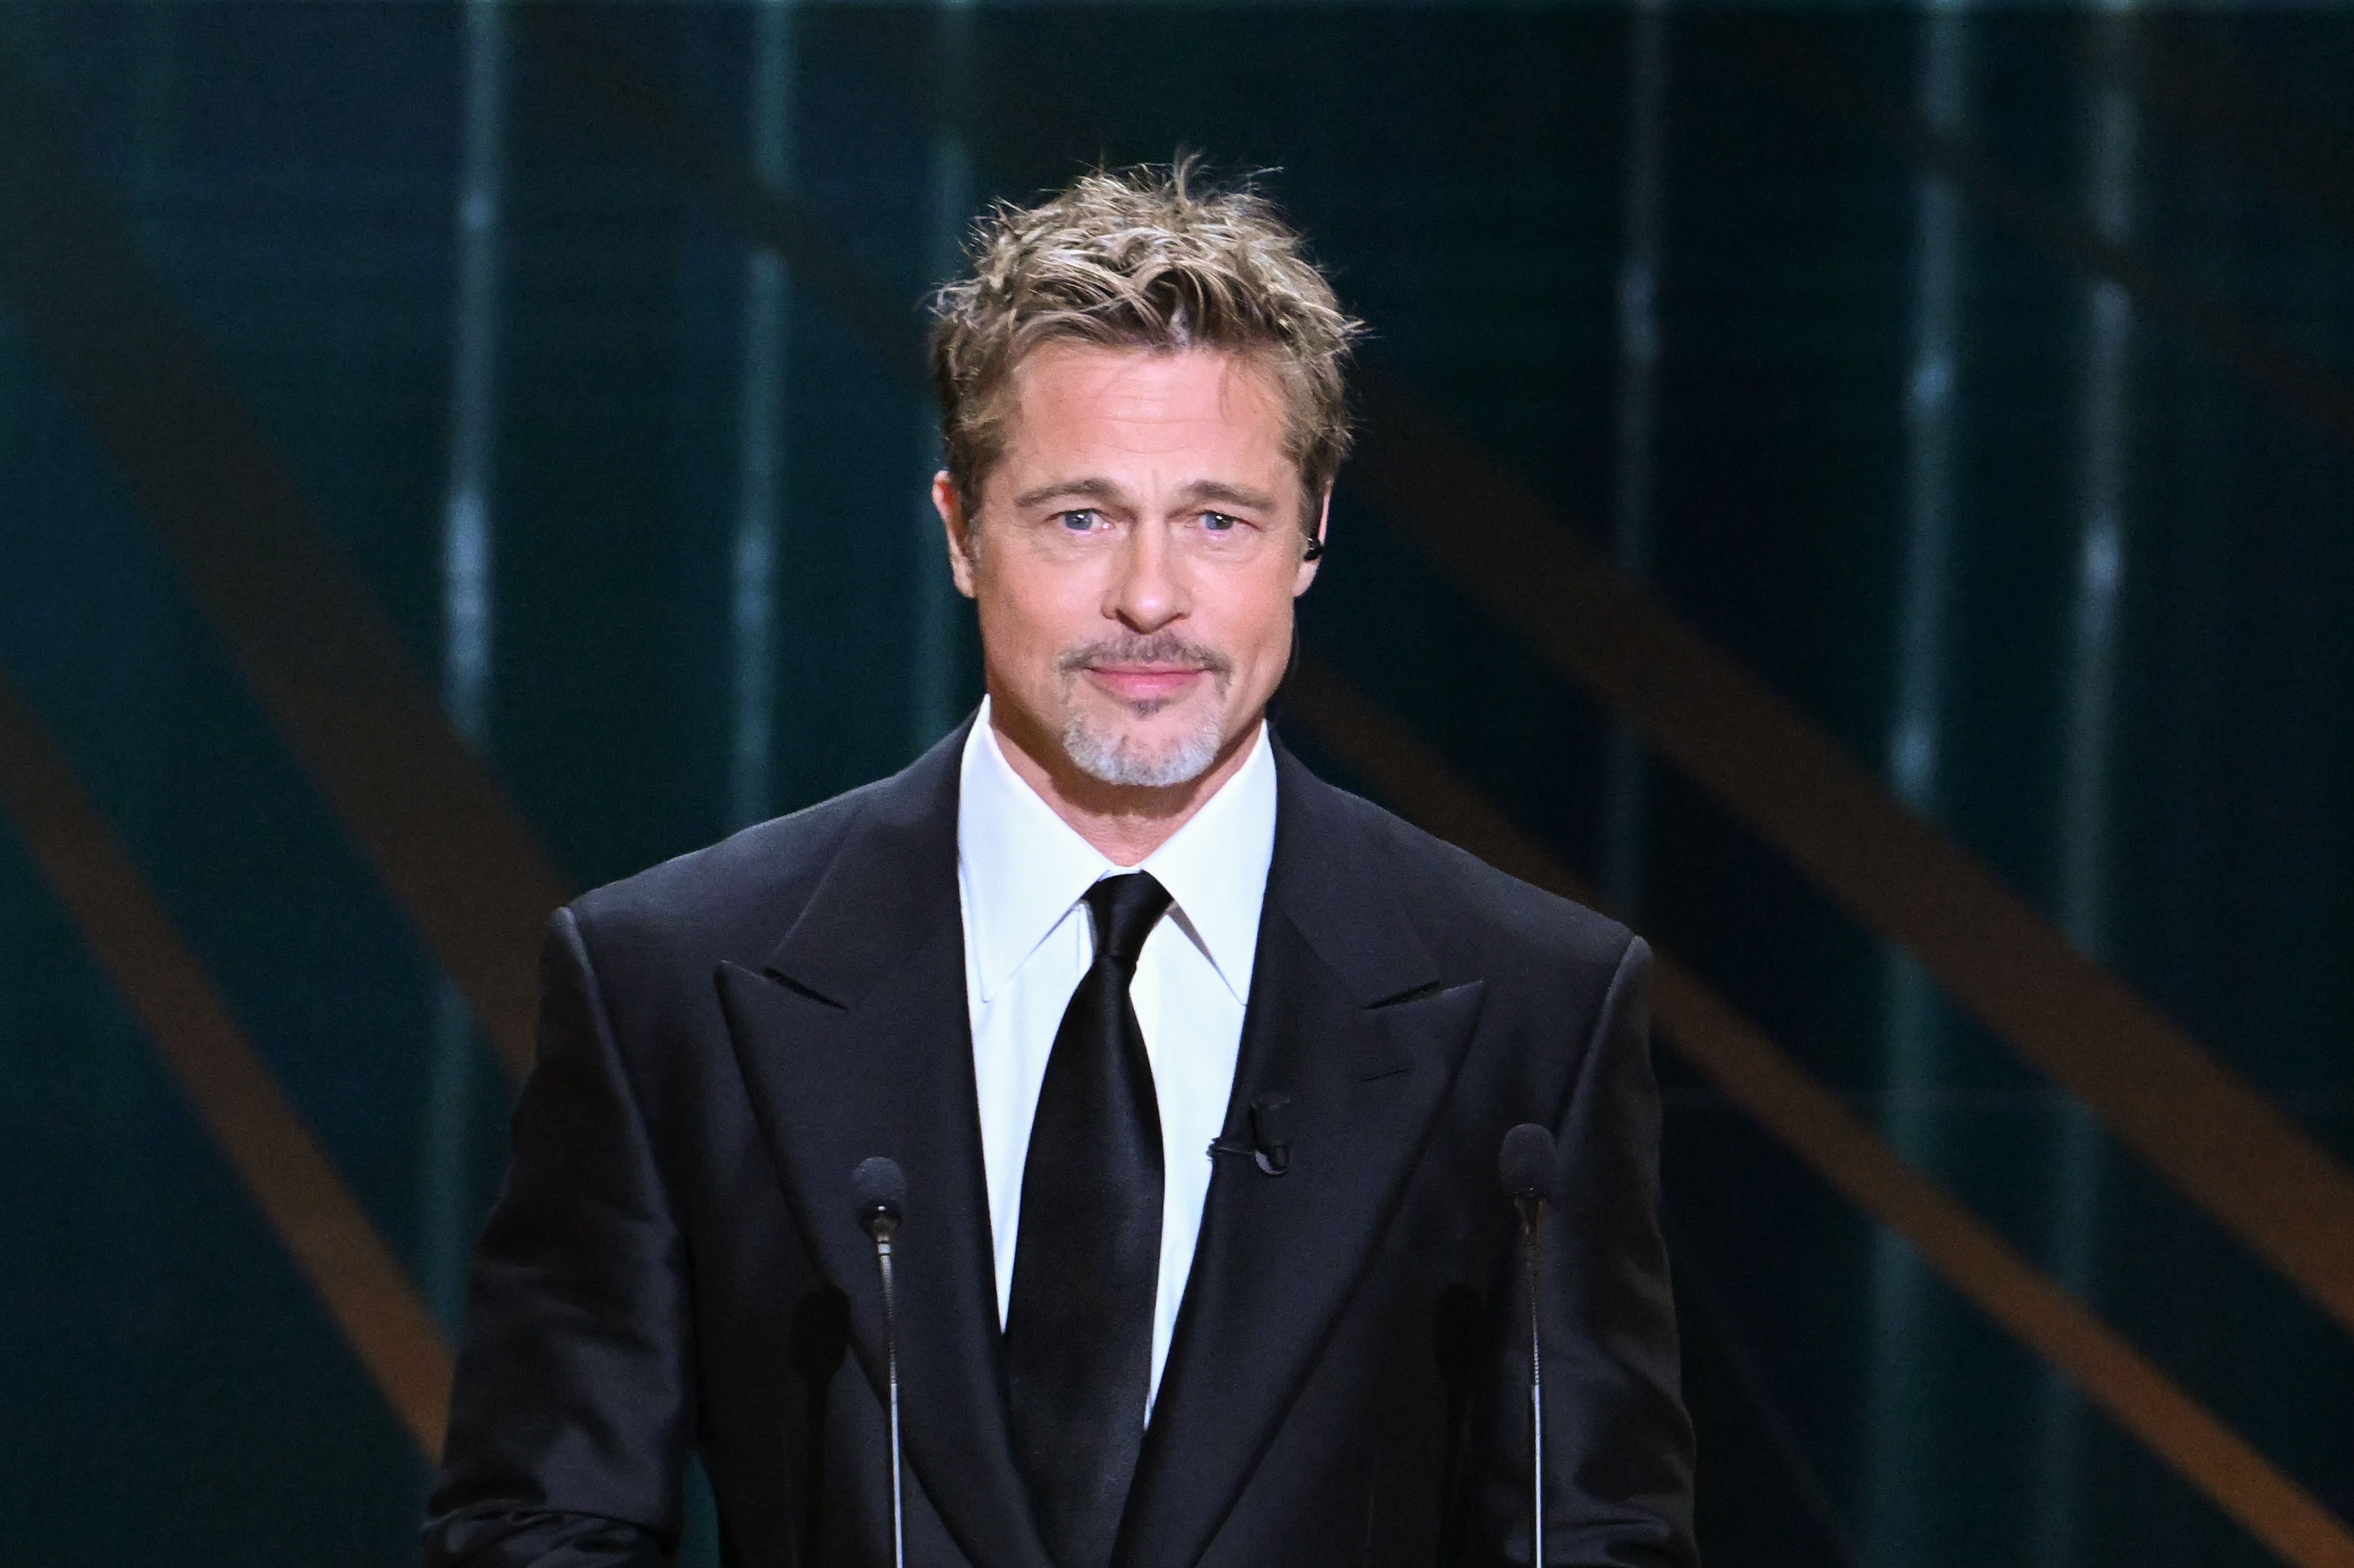 Brad Pitt onstage at the 48th Cesar Film Awards on February 24, 2023 in Paris, France. | Source: Getty Images